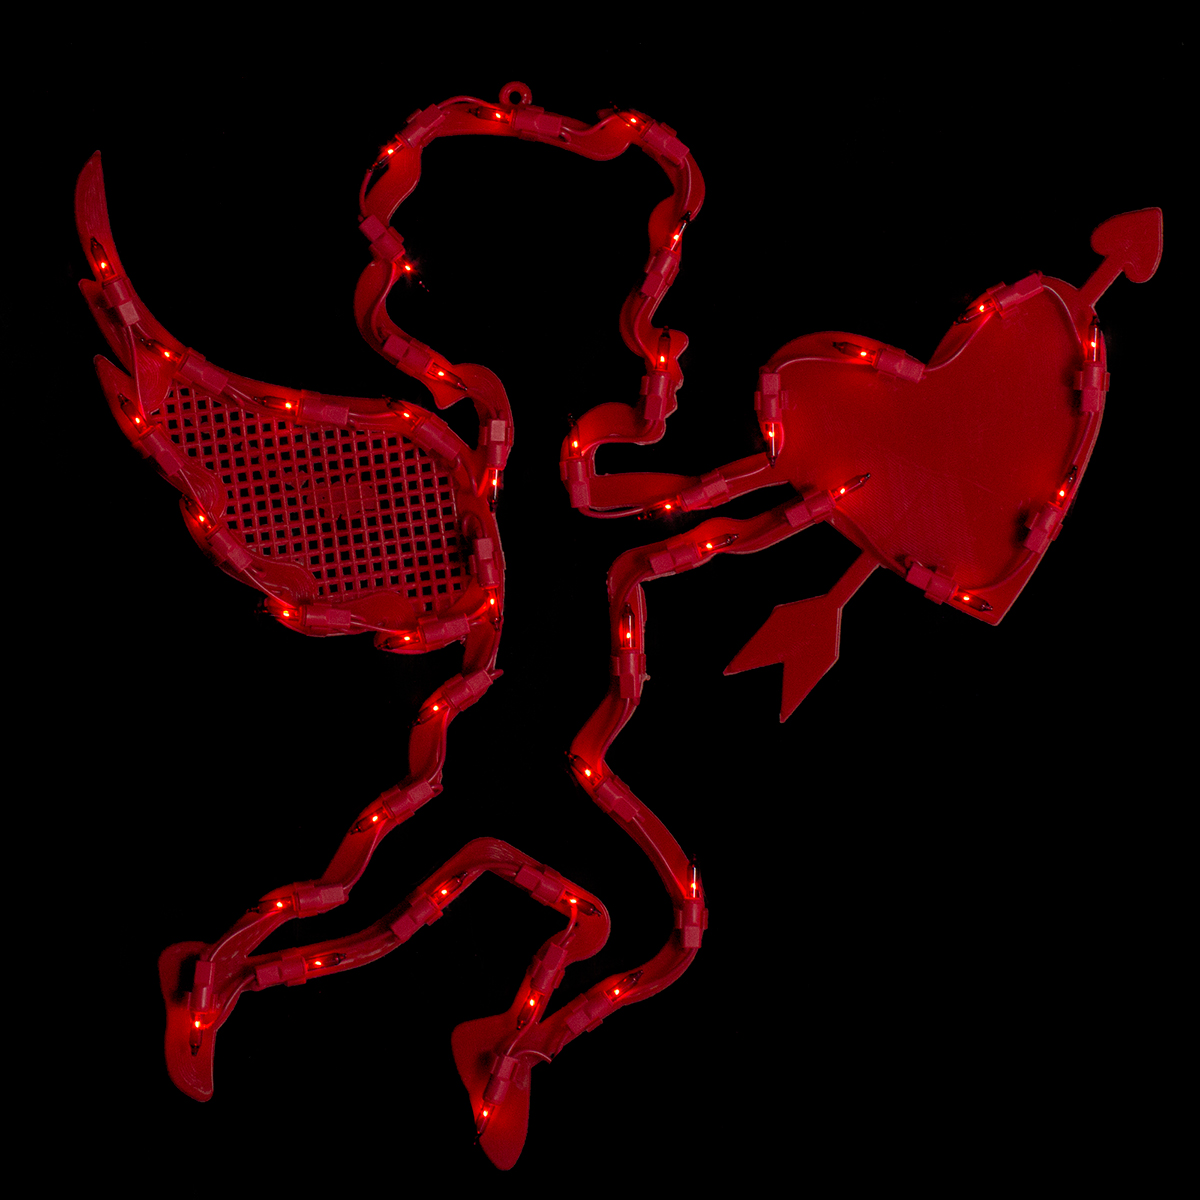 Northlight Seasonal Lighted Red Cupid And Heart Window Silhouette